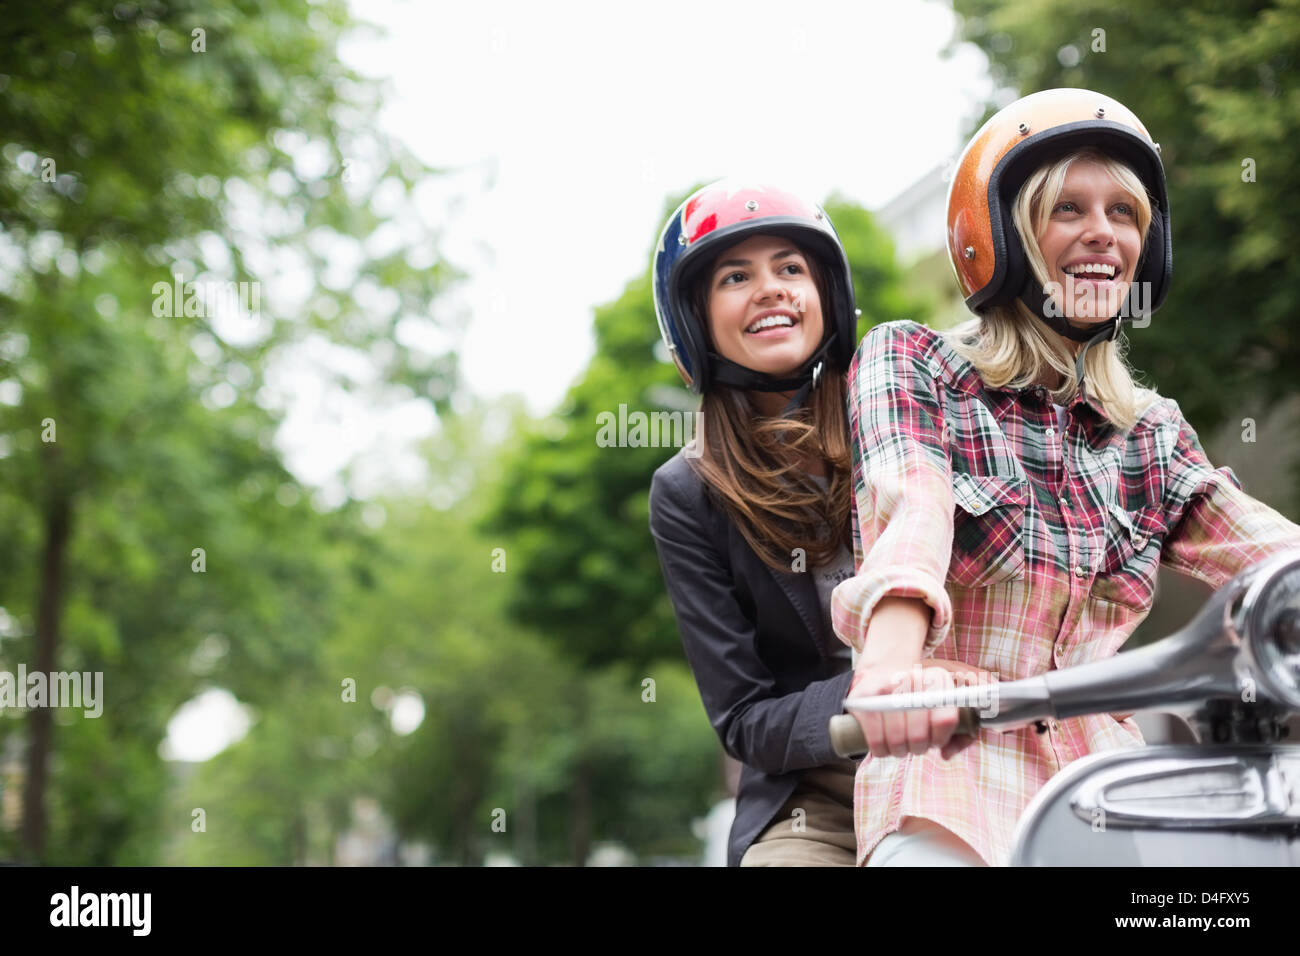 Women riding on scooter together outdoors Stock Photo